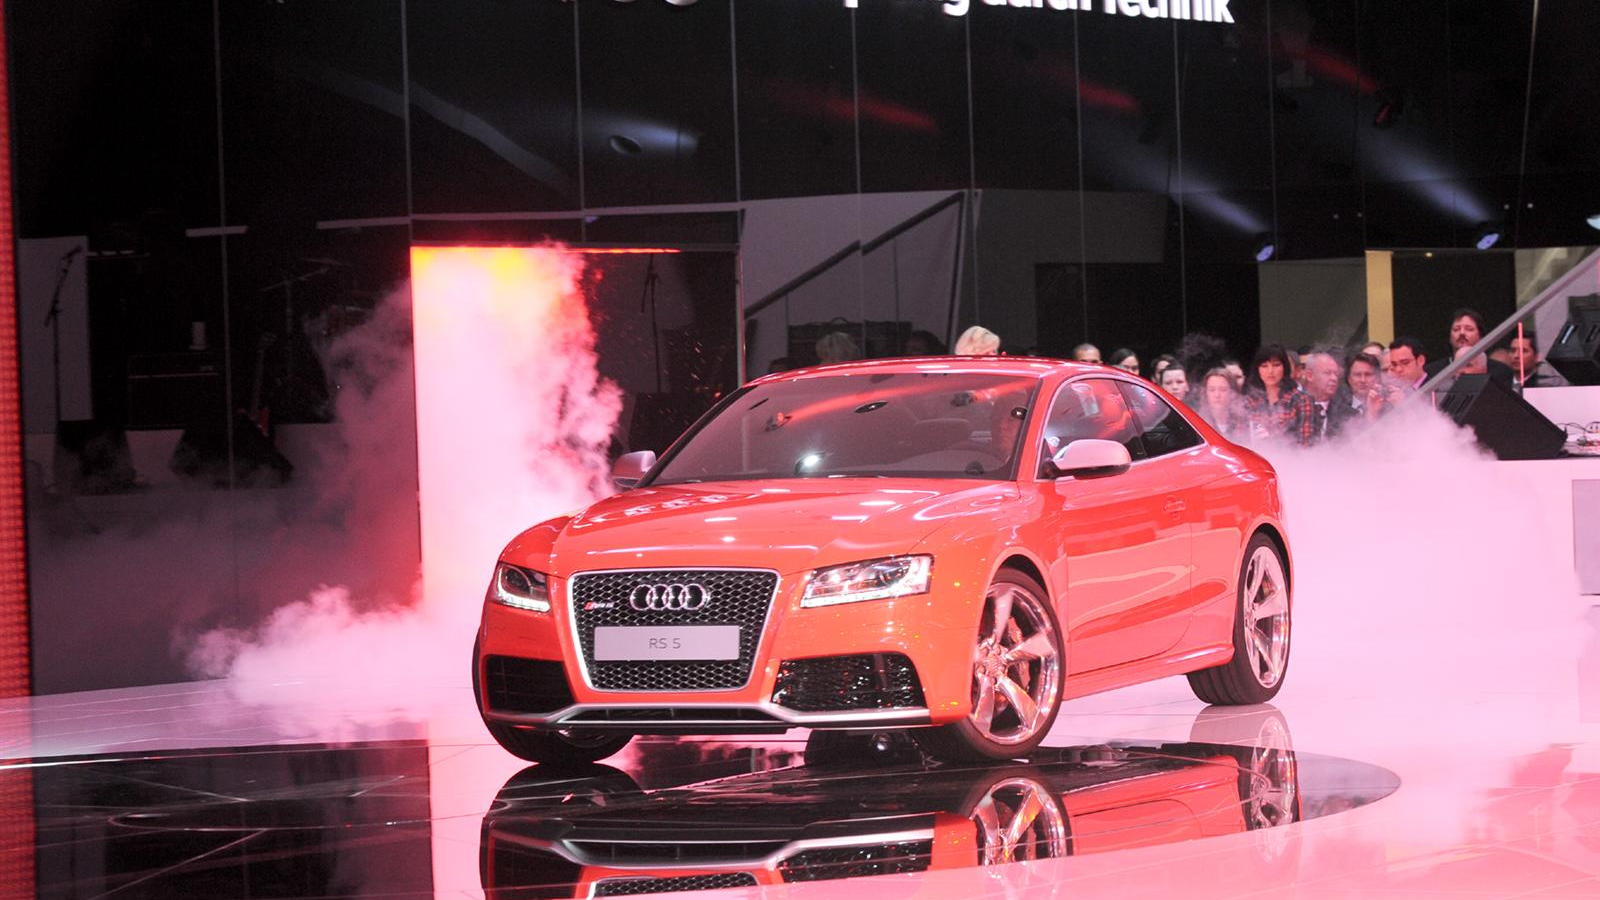 2011 Audi RS5 live in Geneva. Photos © United Pictures, Int'l.